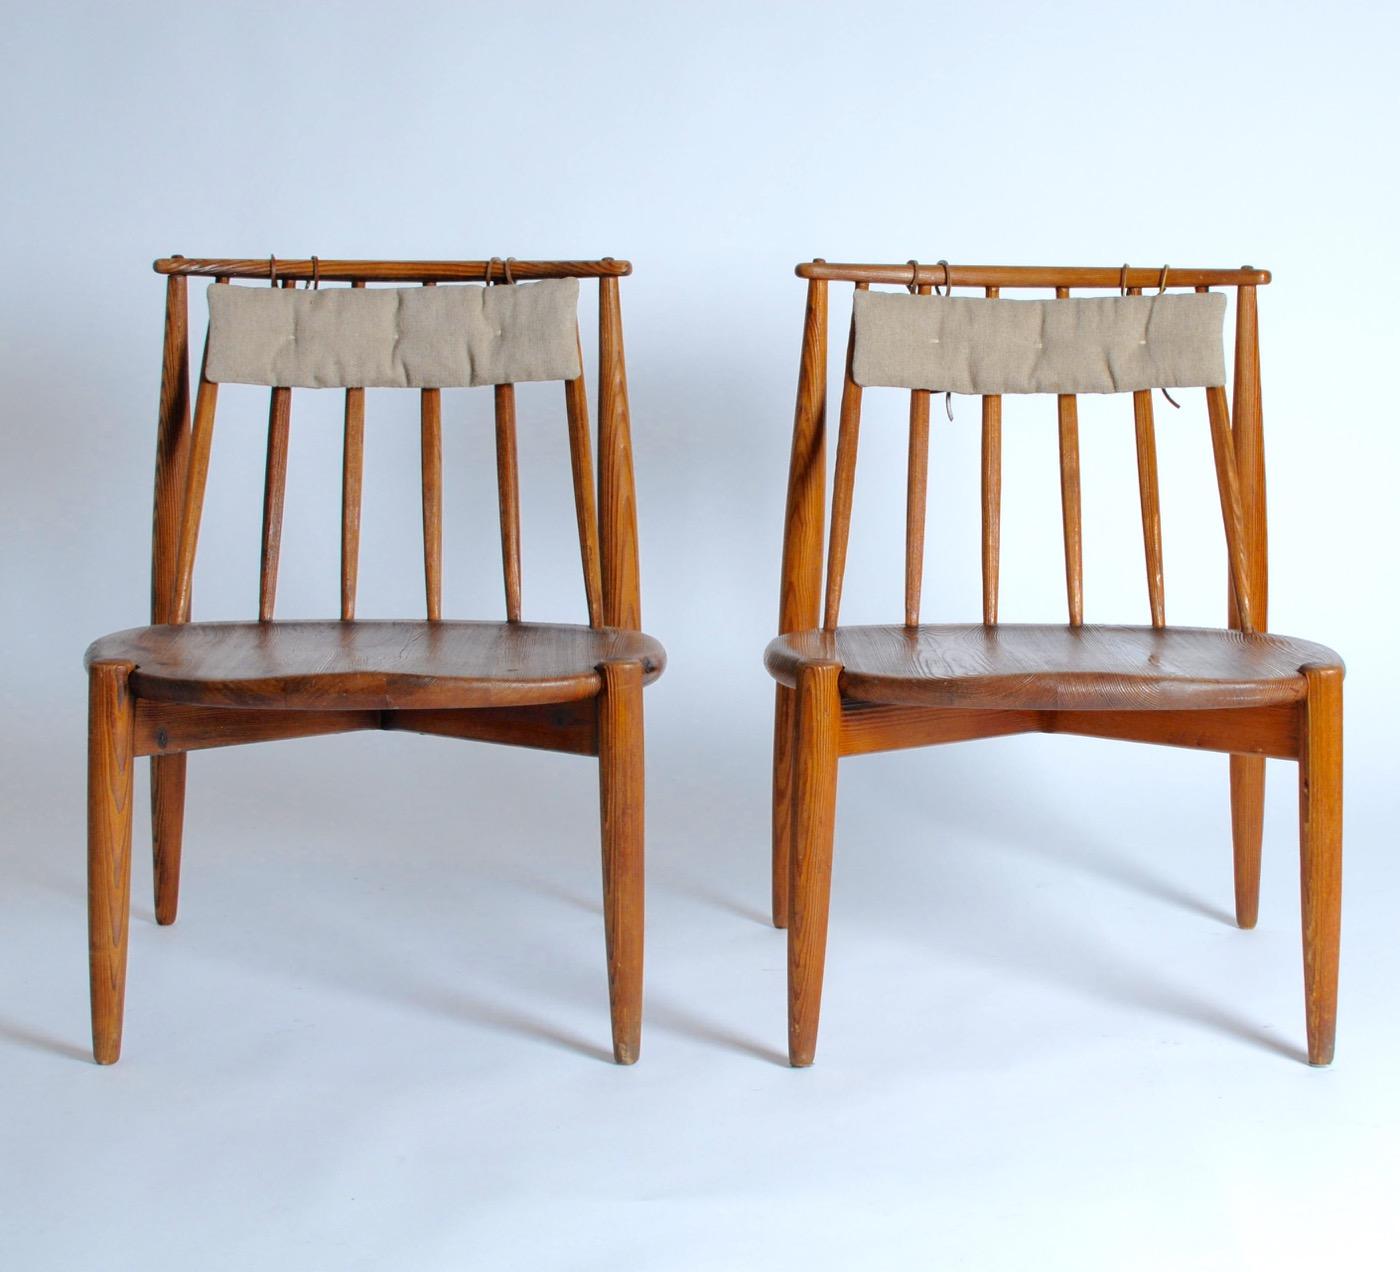 Midcentury Scandinavian Bendt Winge fireplace chairs brushed smoked oak, 1950s.
Small format fire place 